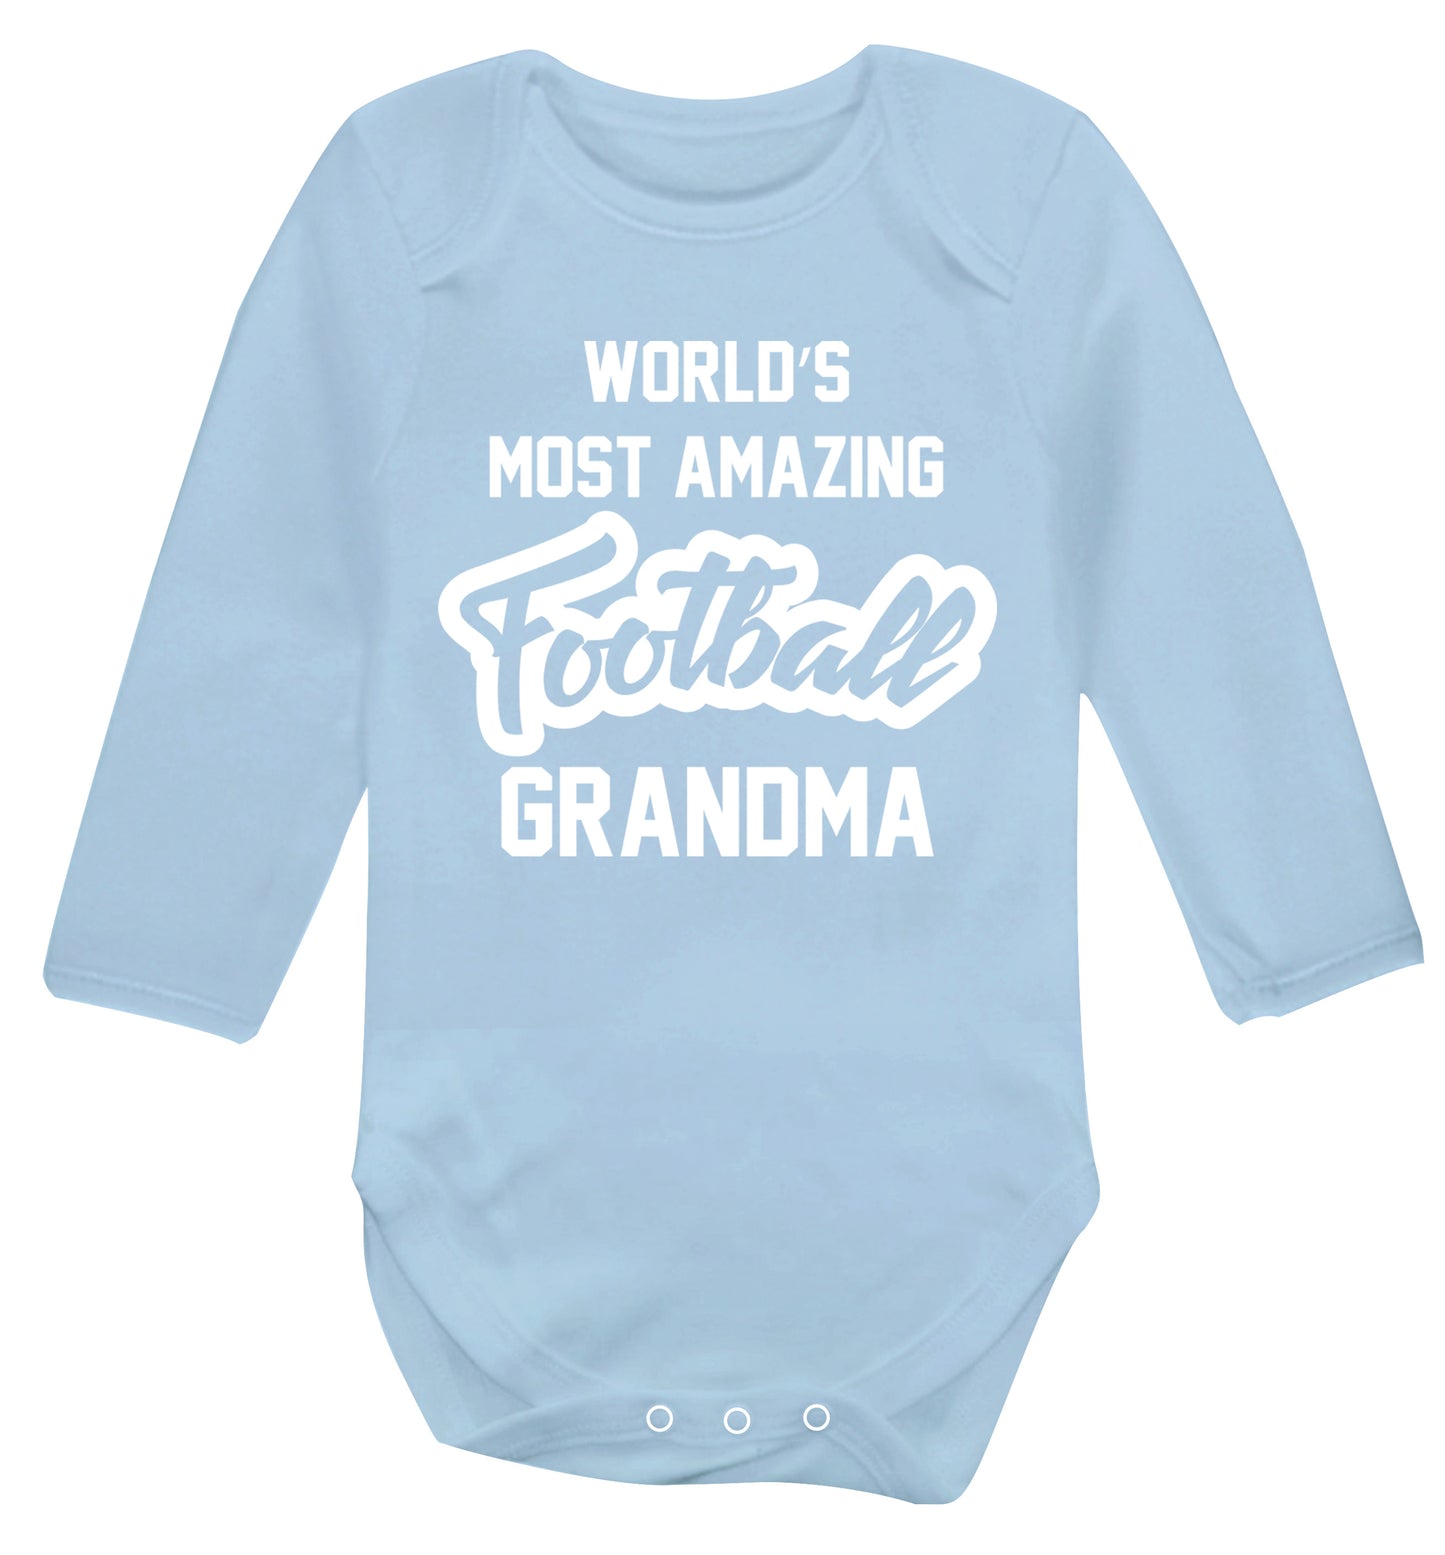 Worlds most amazing football grandma Baby Vest long sleeved pale blue 6-12 months